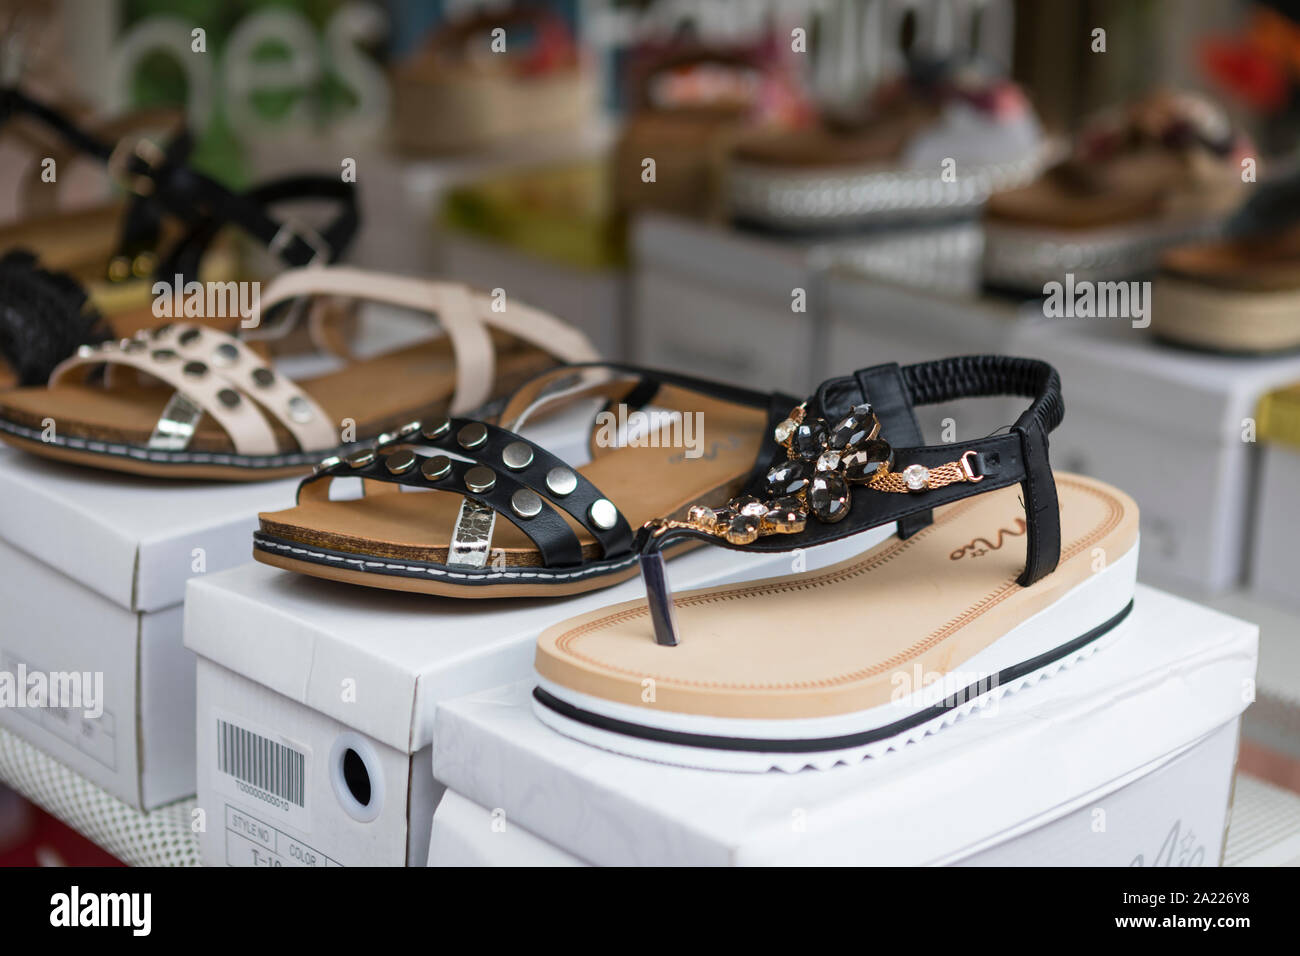 Shoes and sandals for sale at a shop in Germany Stock Photo - Alamy